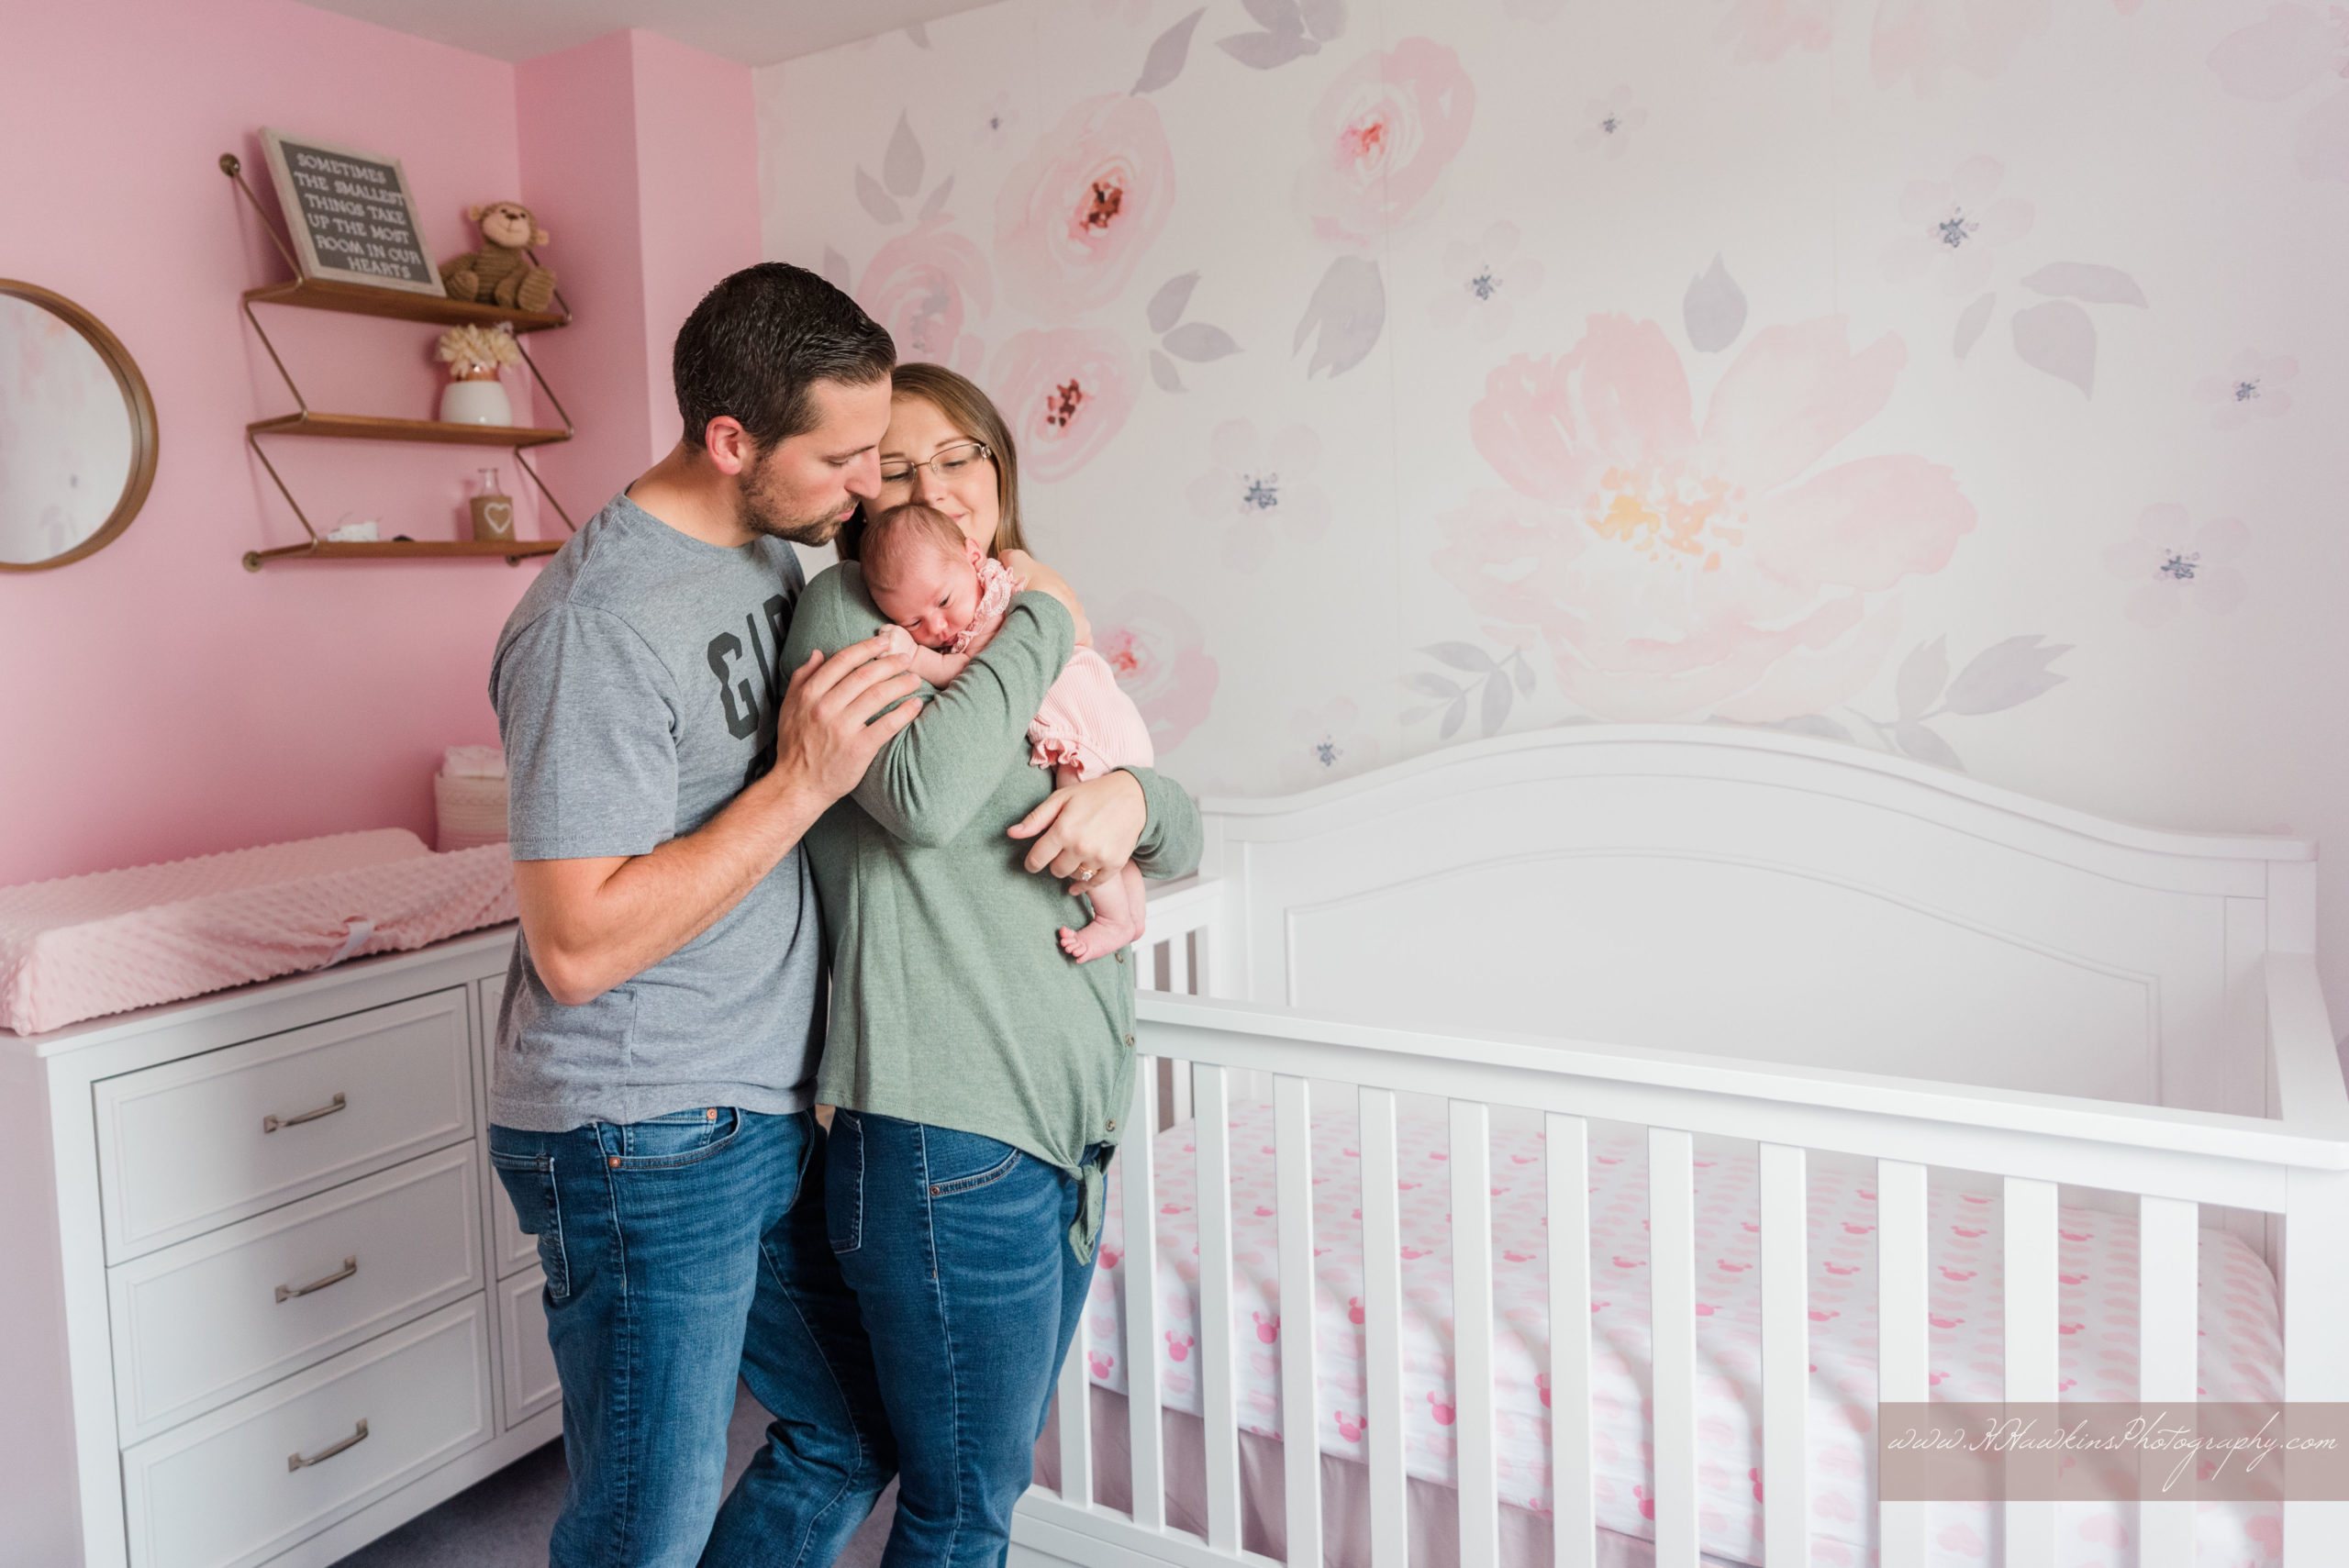 Dad kisses mom on head while mom kisses baby girl in floral pink nursery during lifestyle newborn pictures session by Orlando family photographer